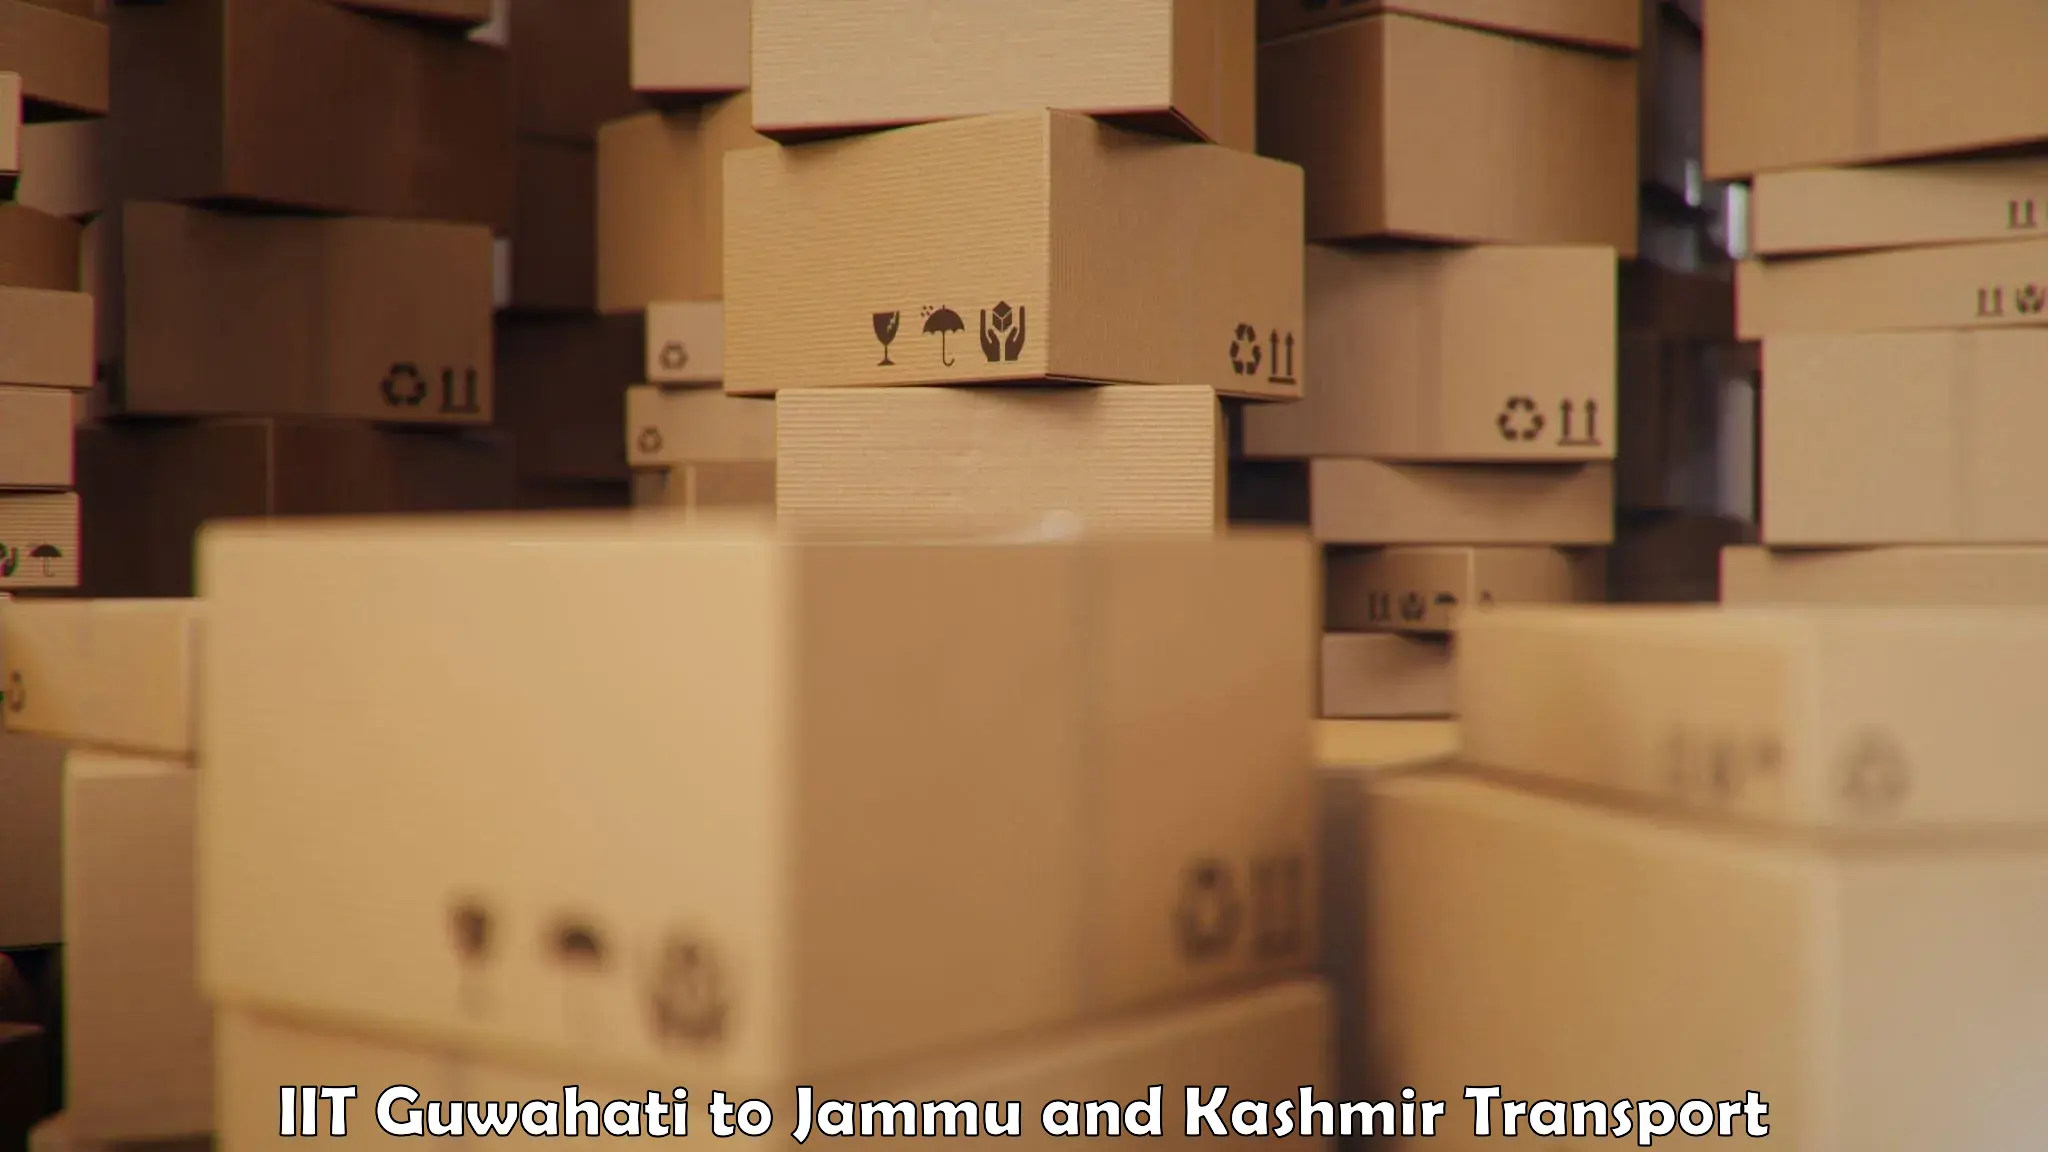 Container transport service IIT Guwahati to Sopore